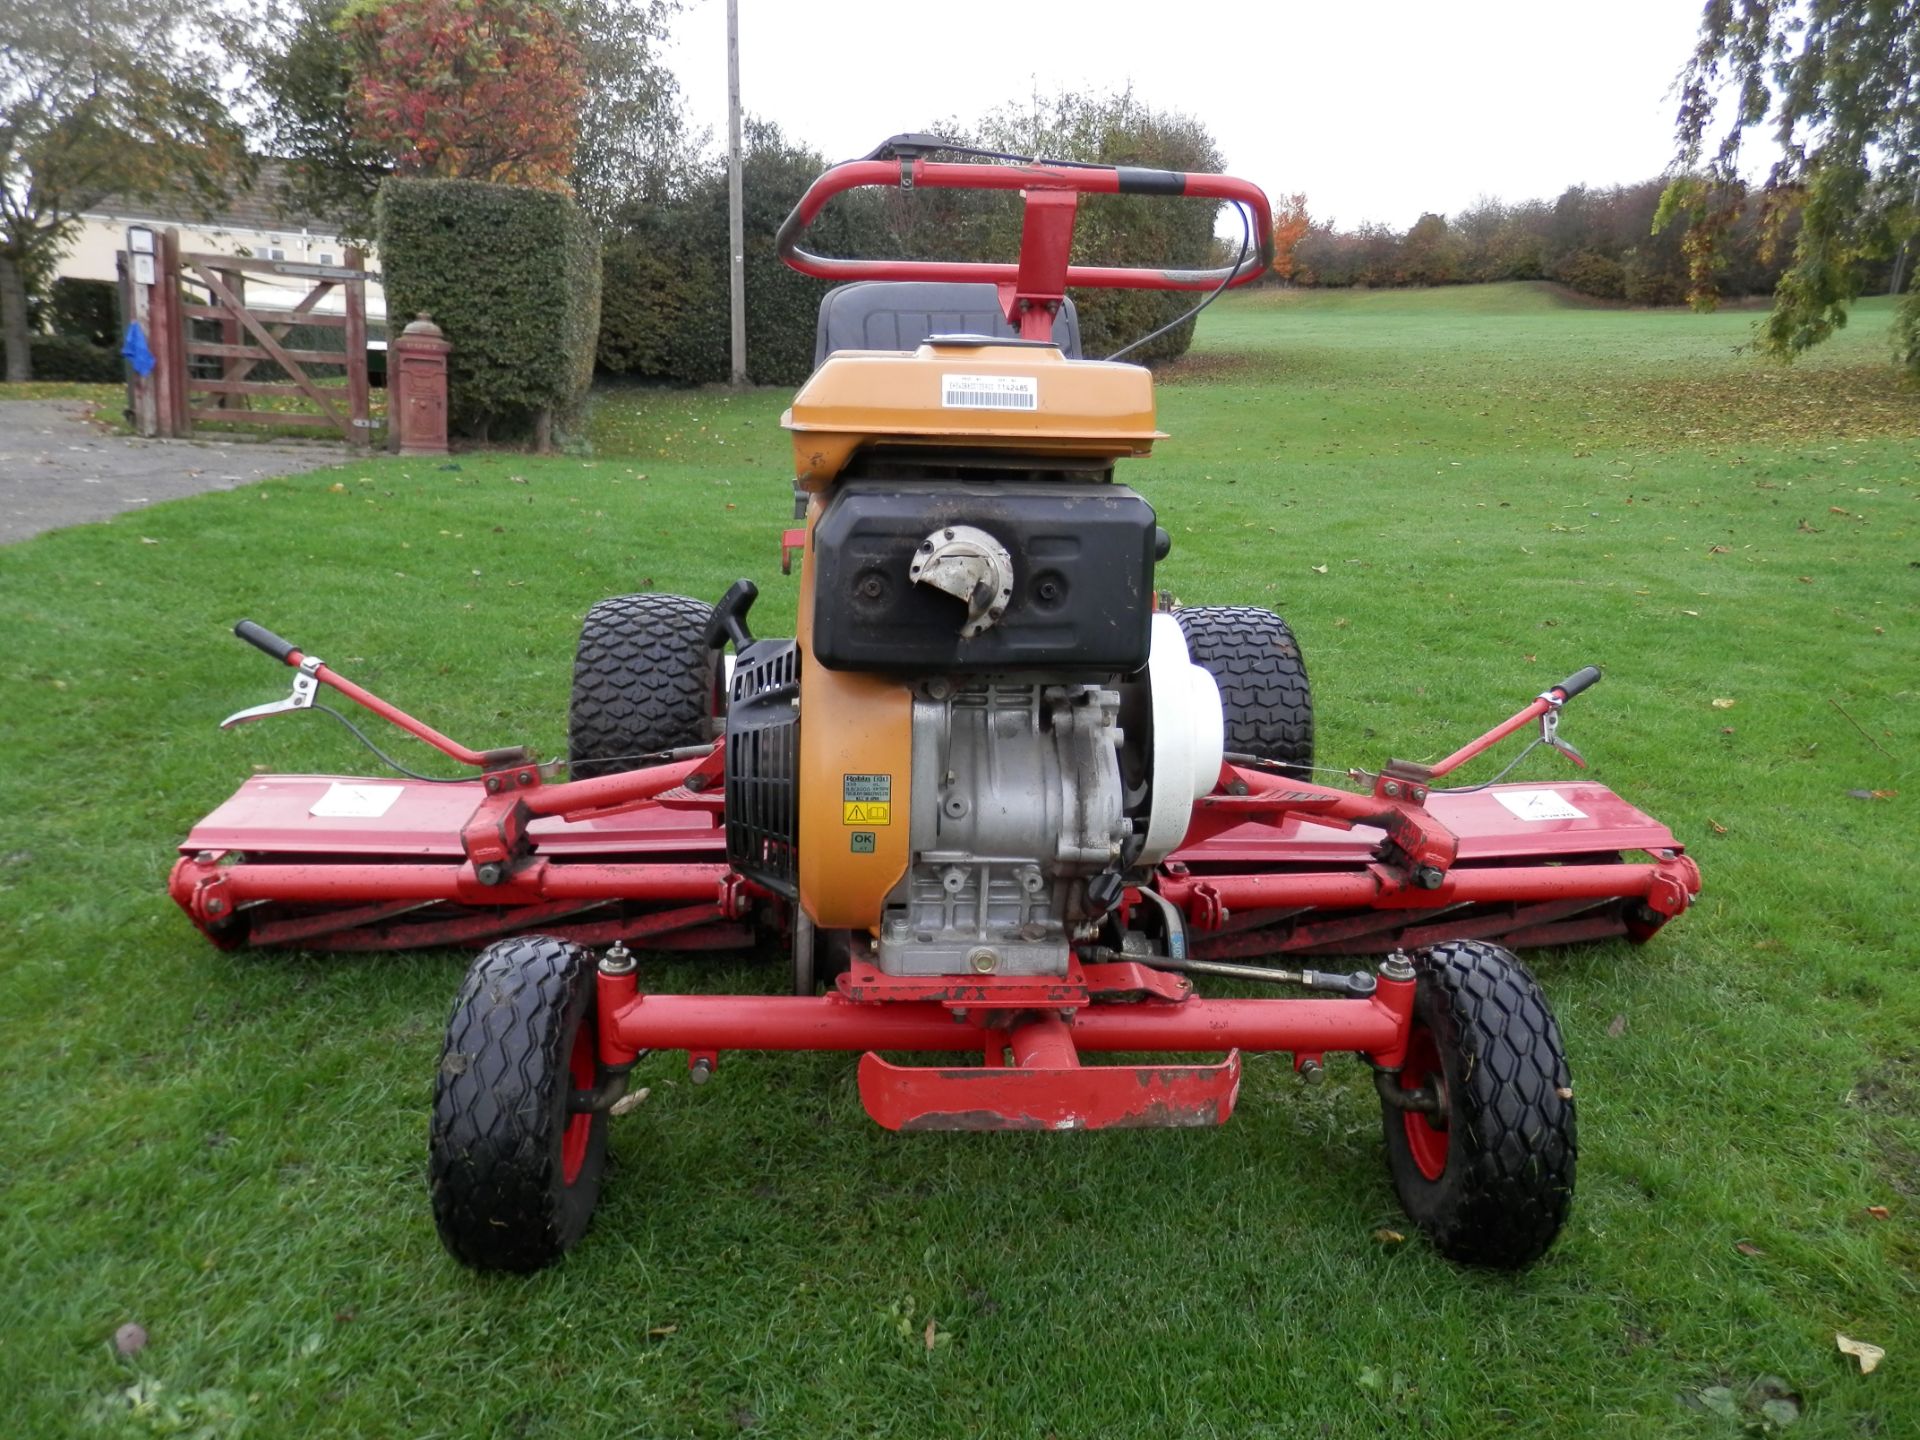 ALL WORKING SAXON TRIPLE MK2 RIDE ON MOWER, UPGRADED WITH GEARS, BRAKE PEDAL & DIFF LOCK. - Image 7 of 14